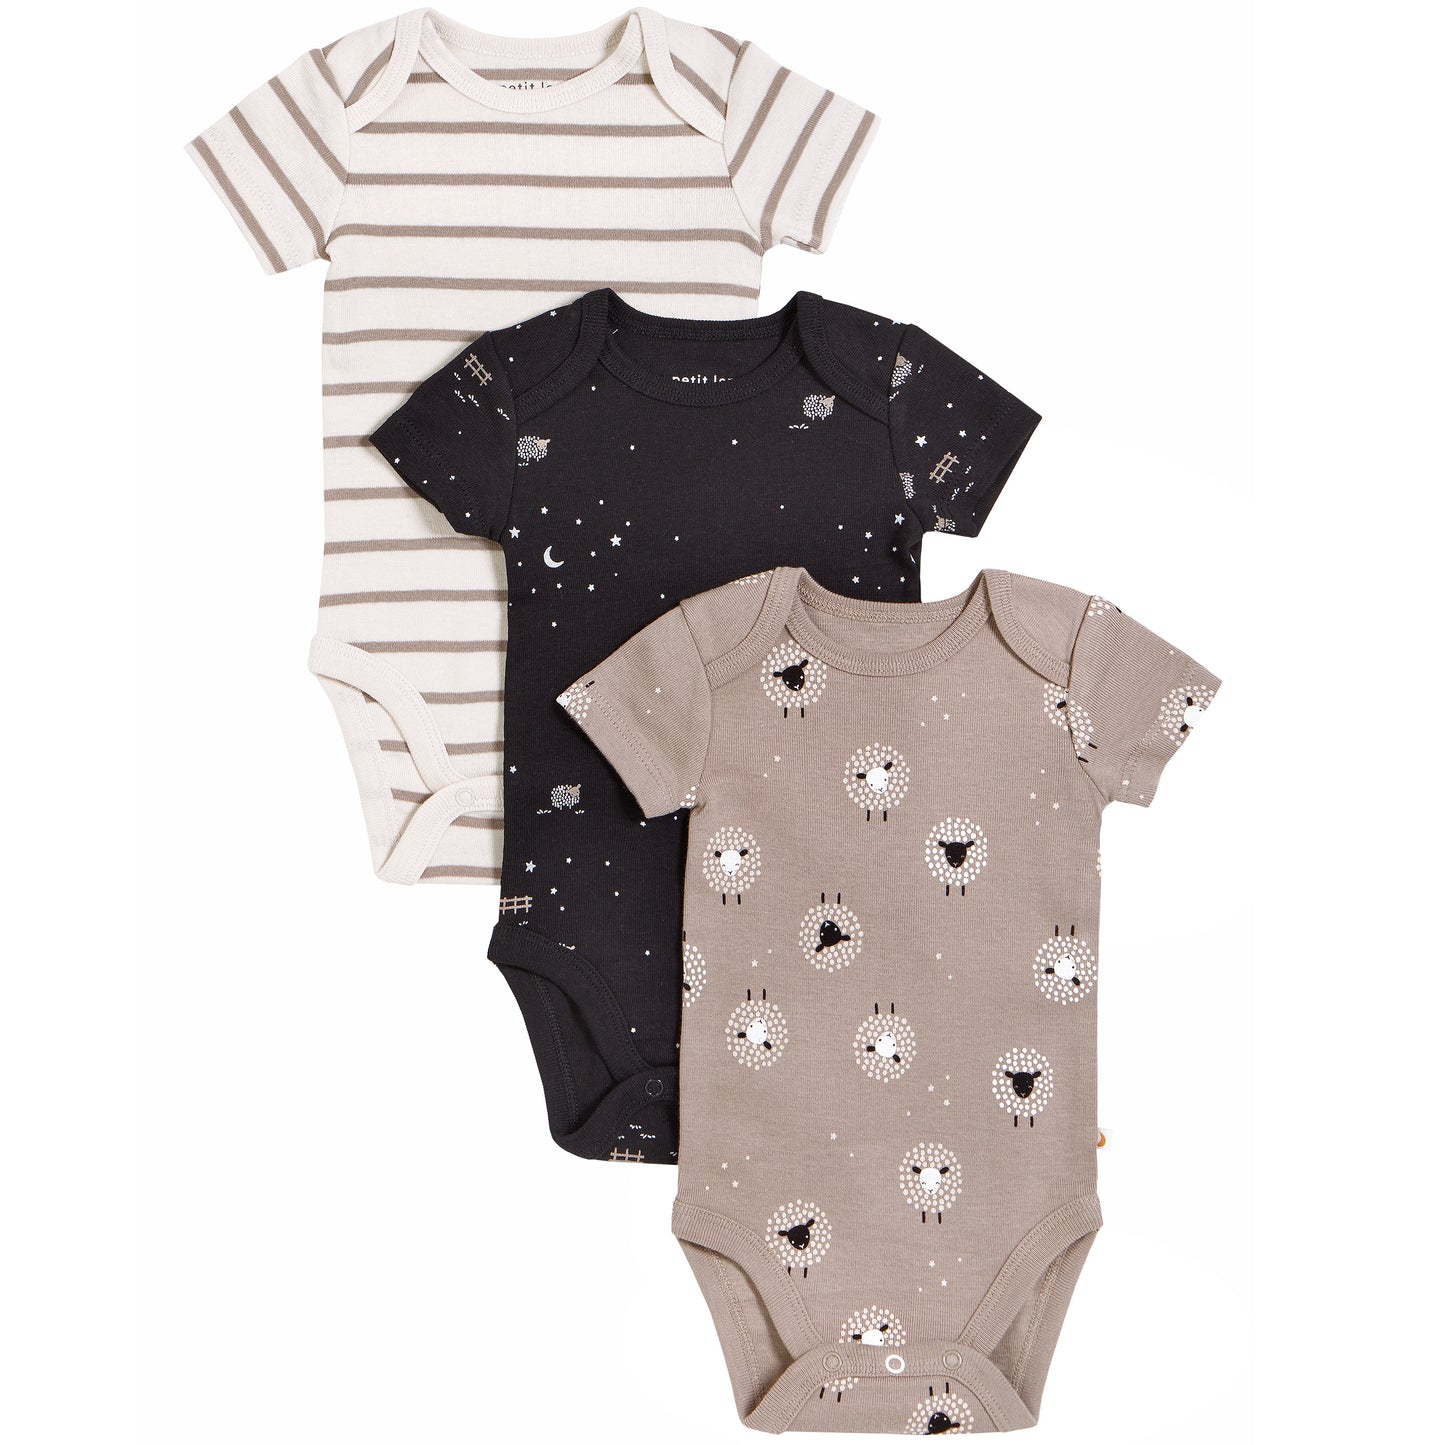 Counting Sheep Bodysuits